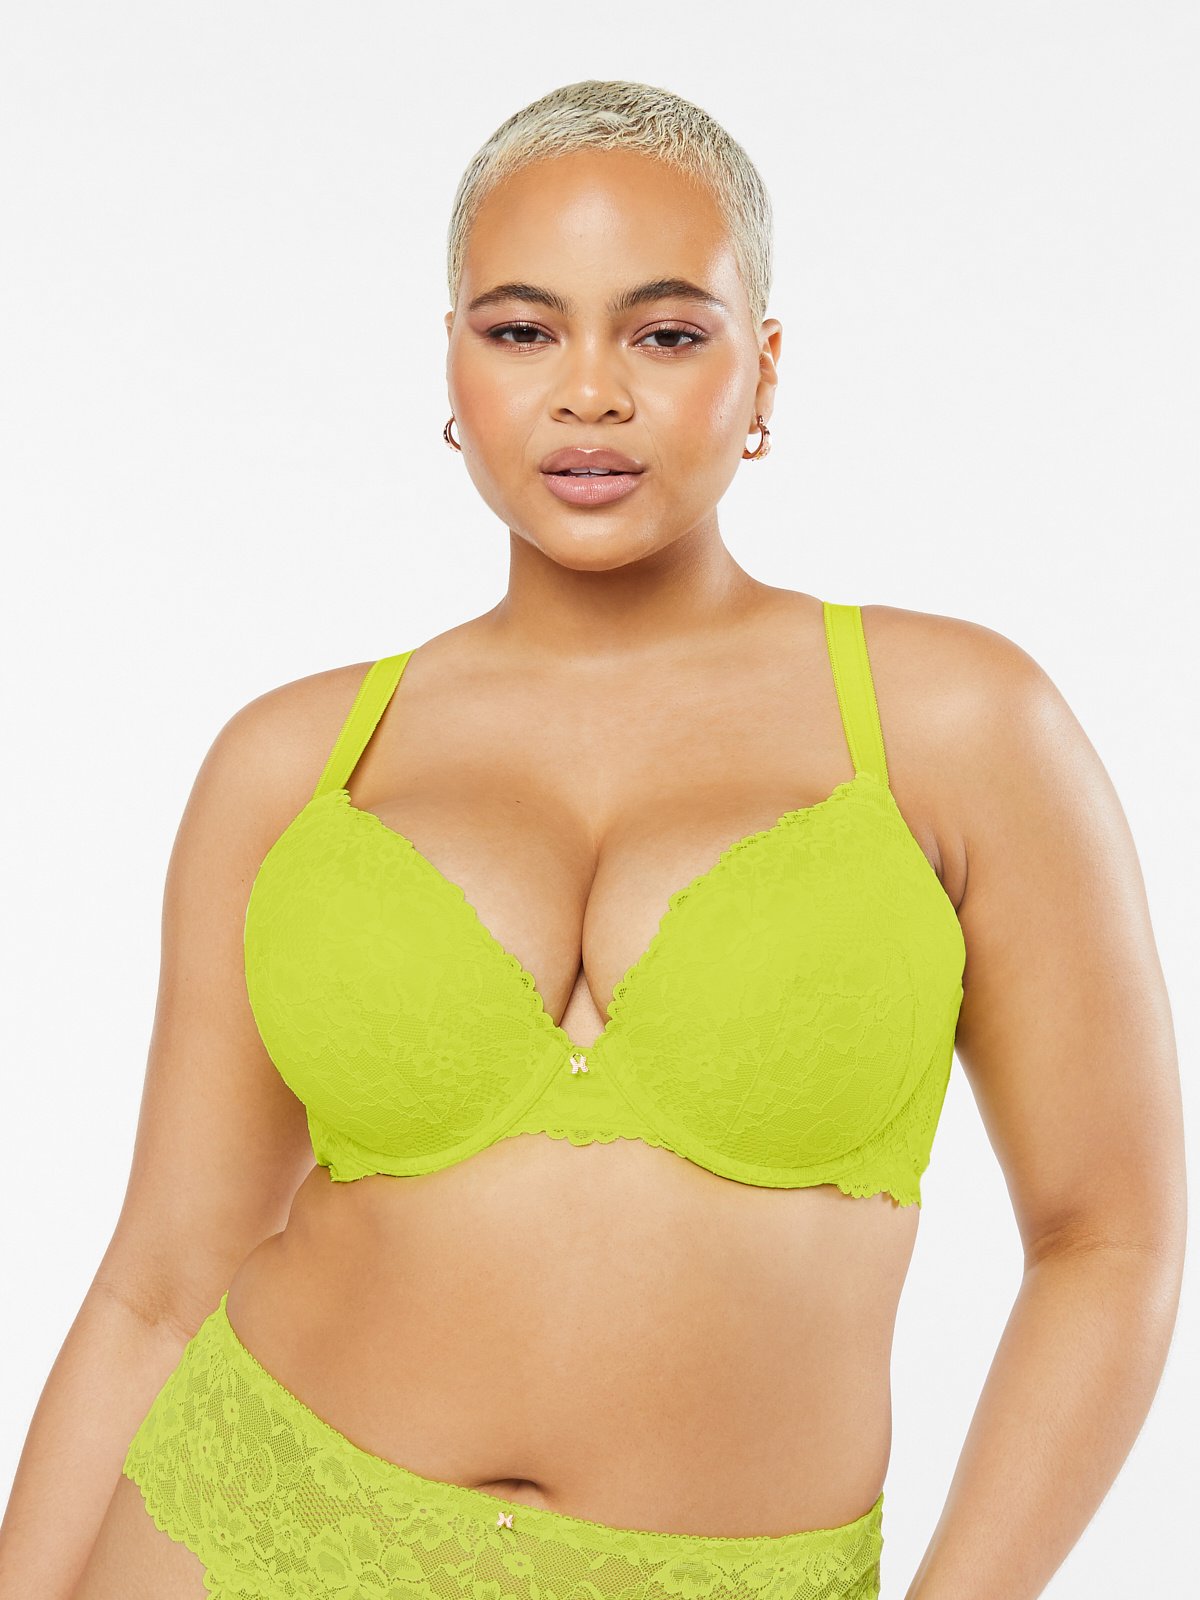 Floral push-up bra with lace Woman, Green